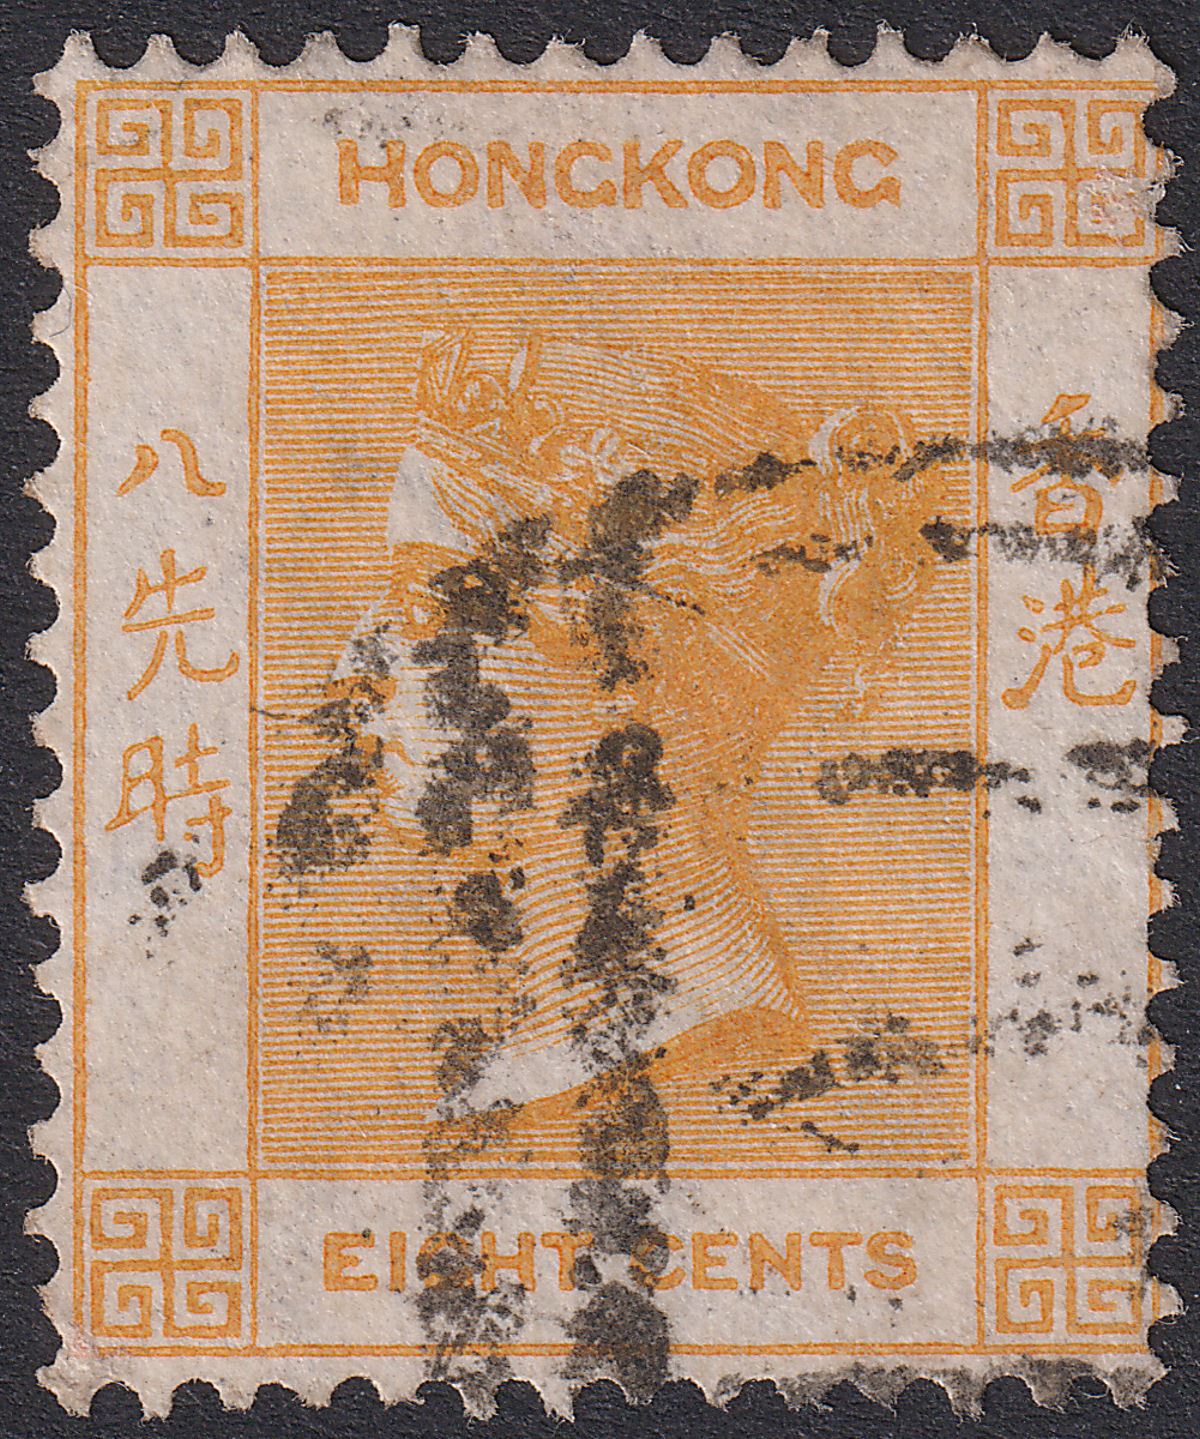 Hong Kong 1863 QV 8c Orange Used with A1 Postmark Amoy SG Z11 cat £55